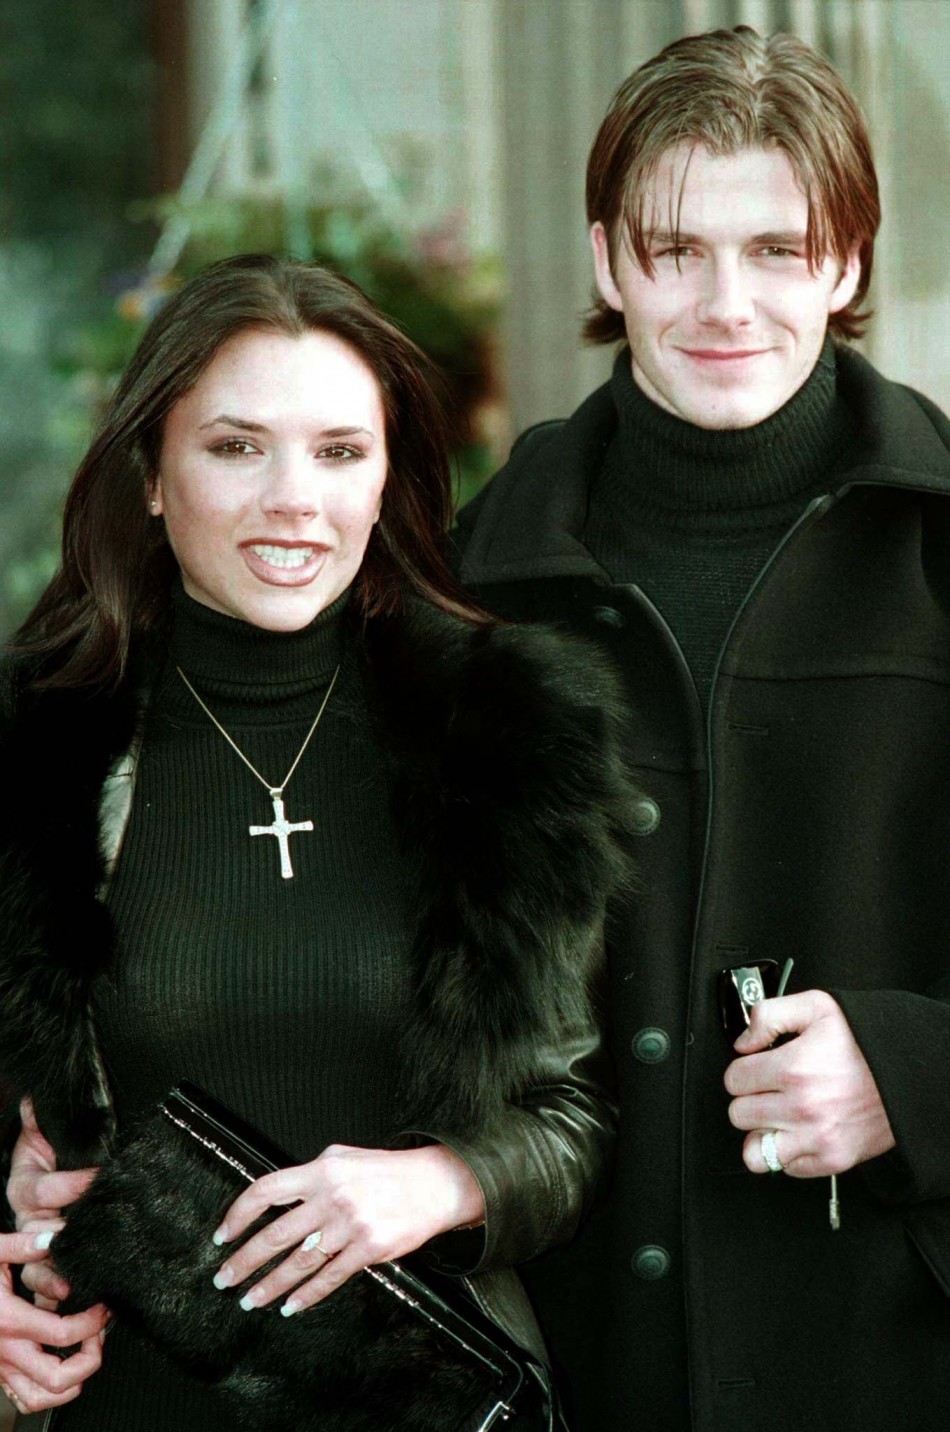 Victoria Adams, then a member of the British band The Spice Girls, poses for photographers with her fiancee, Manchester United footballer David Beckham January 25 1998. Beckham and Adams made their engagement public at a luxury hotel after media speculati